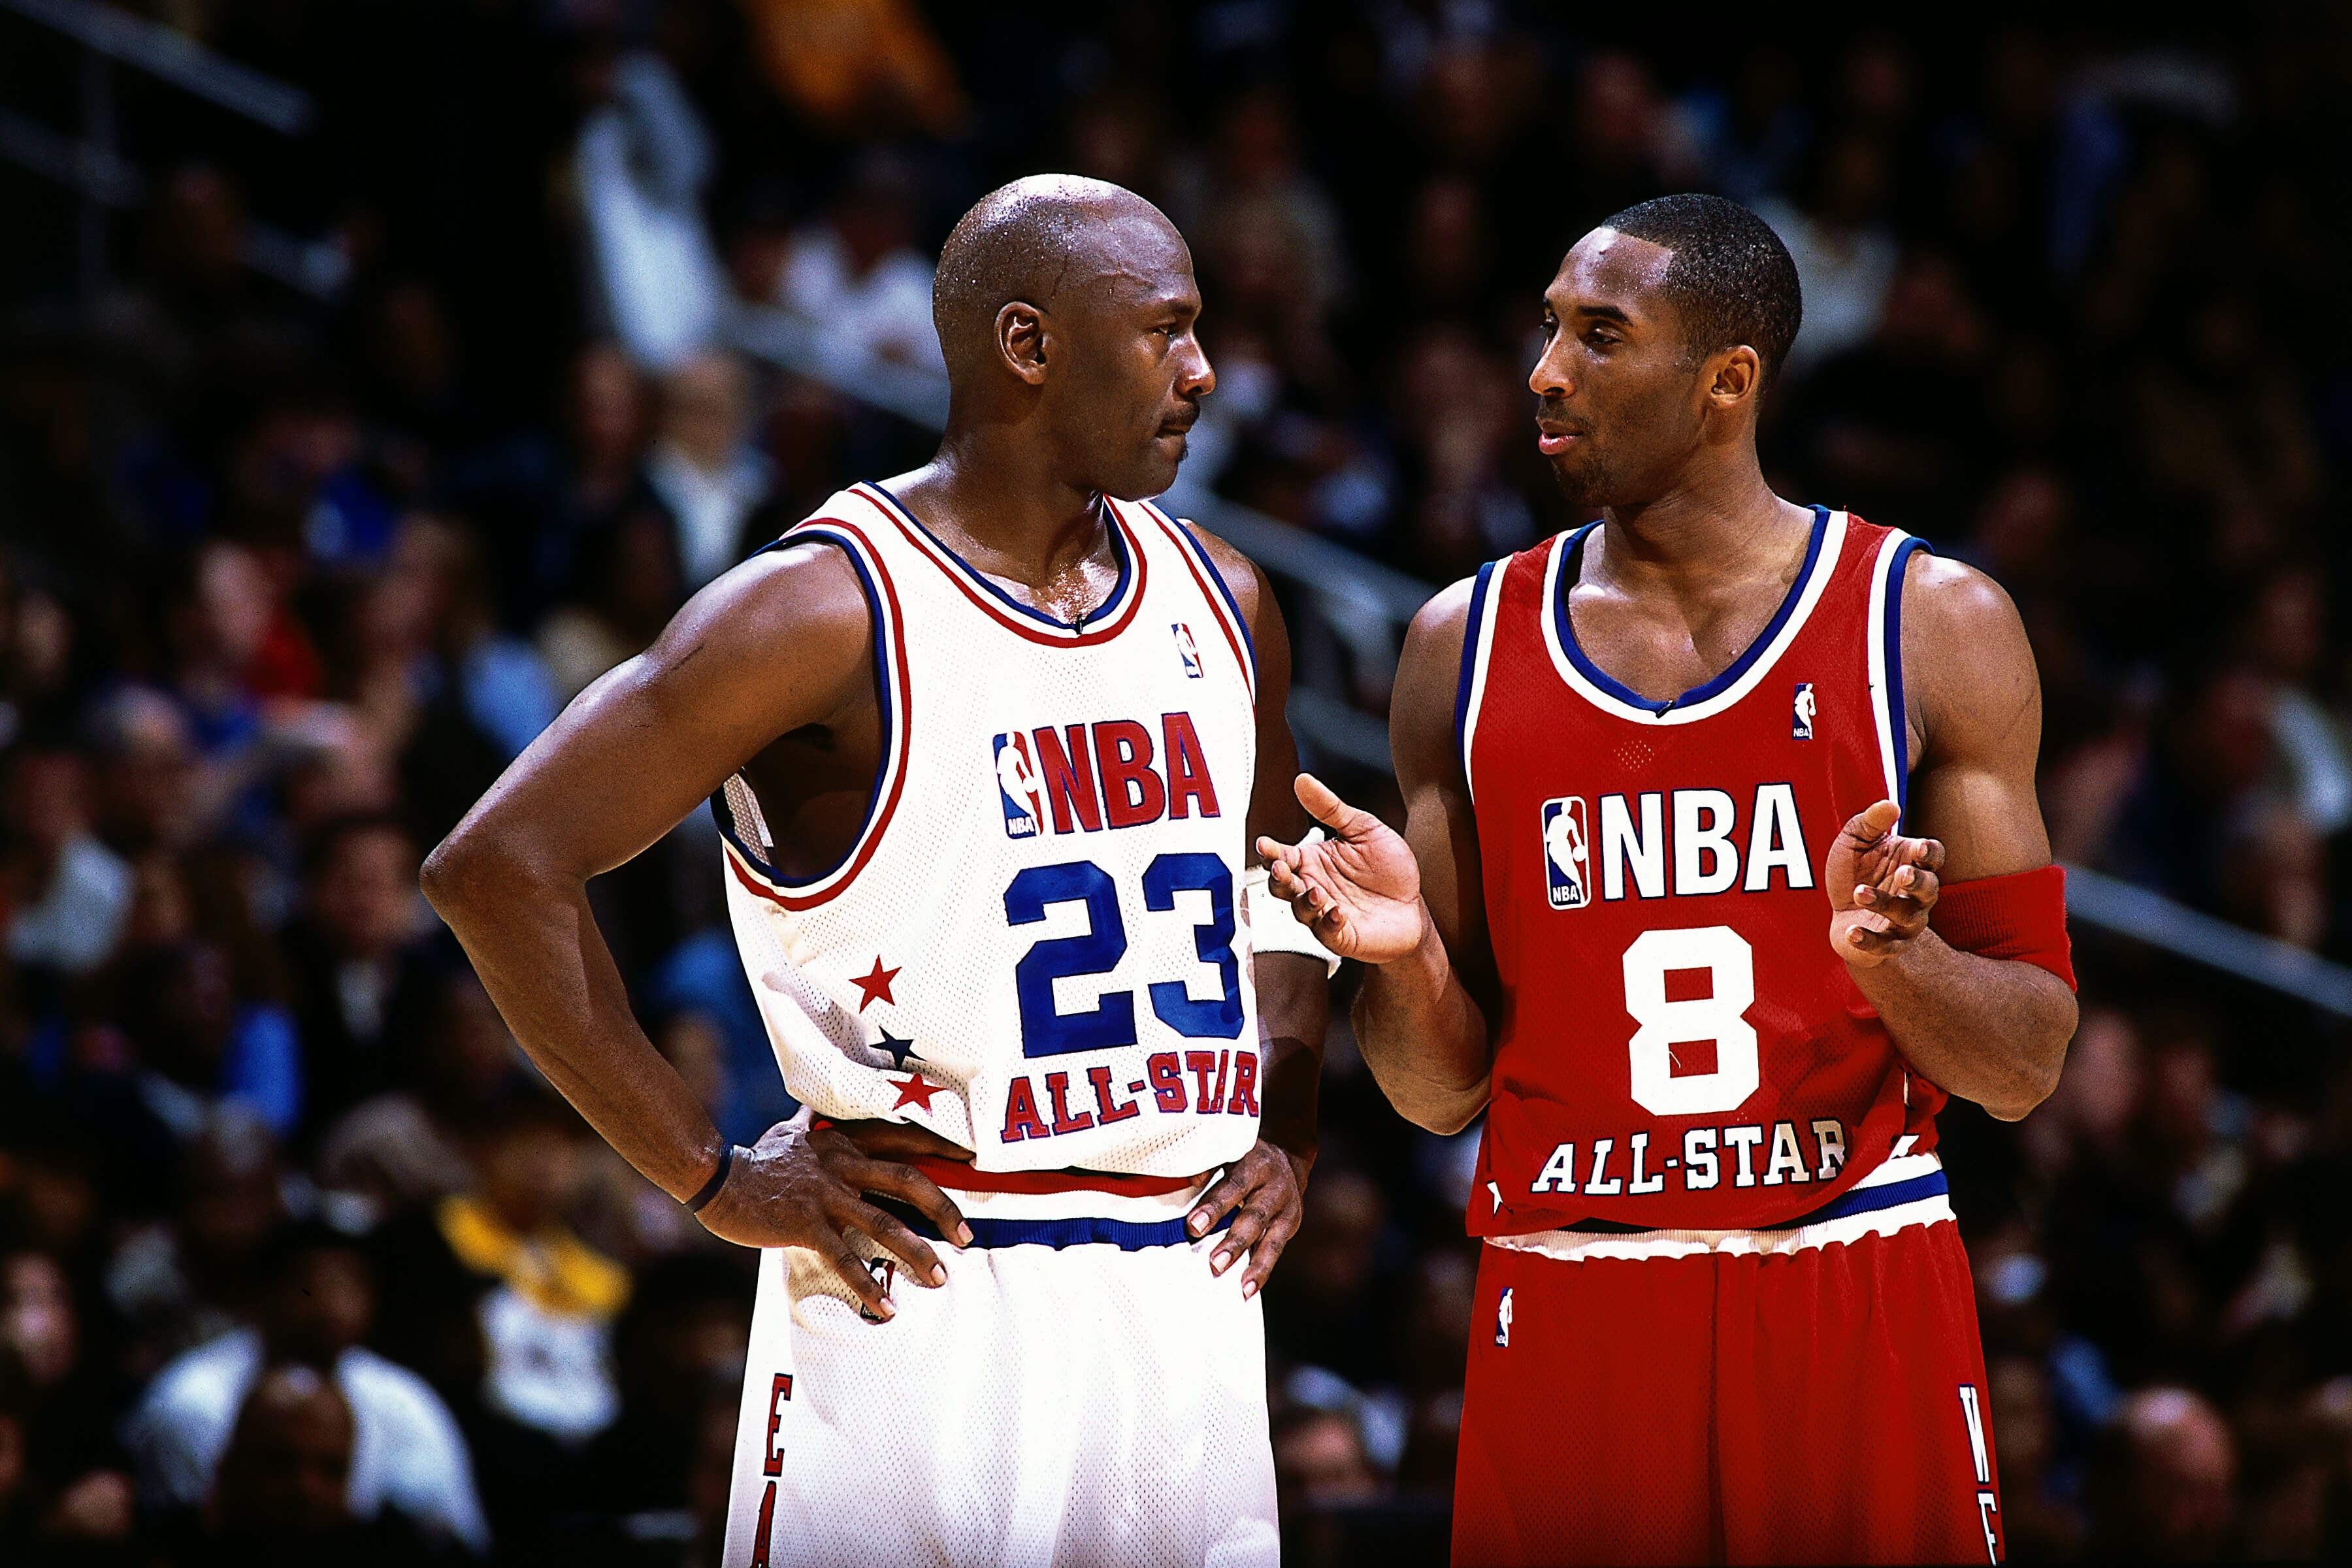 Kobe Bryant tribute: Michael Jordan says he was 'a little brother